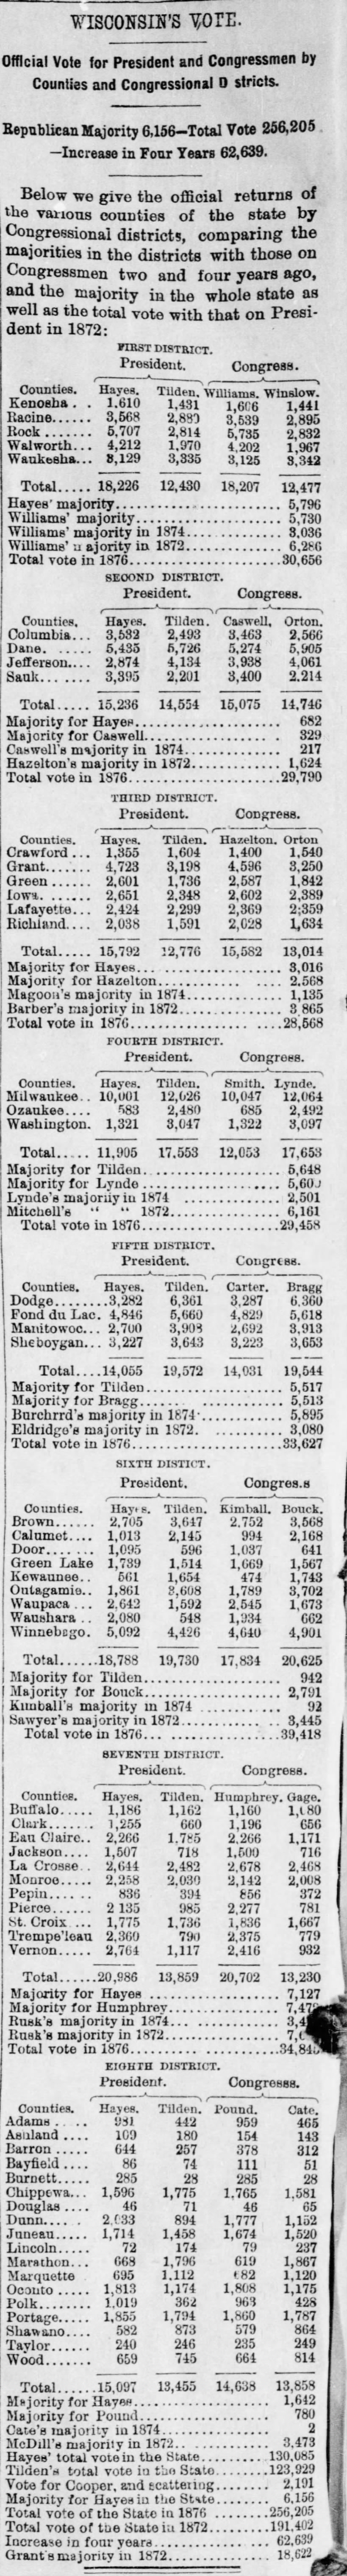 Wisconsin 1876 general election